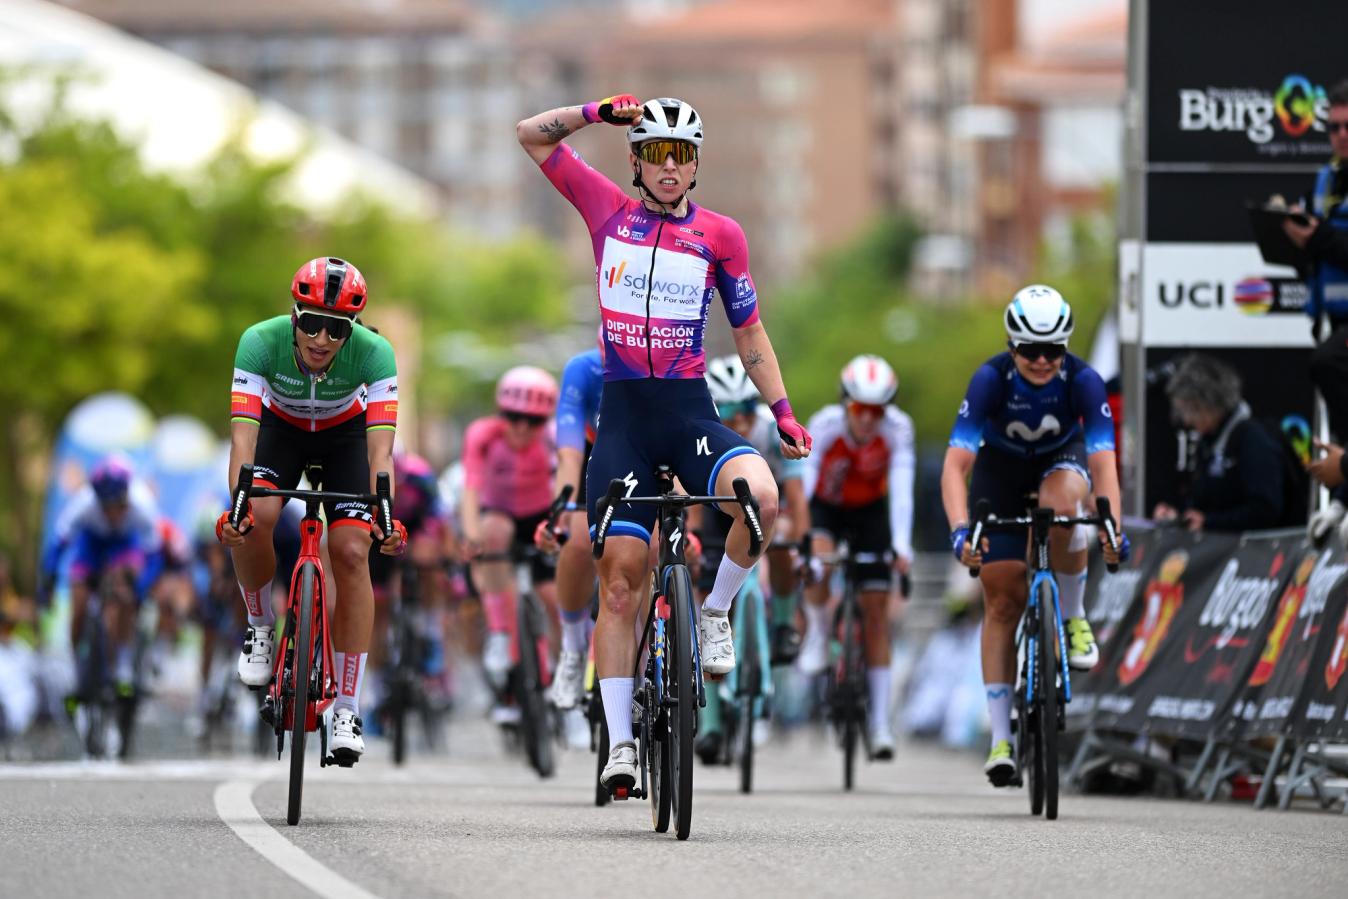 After relegation on stage 2, it was a determined Lorena Wiebes who reclaimed victory on stage 3 of the Vuelta a Burgos Féminas. 